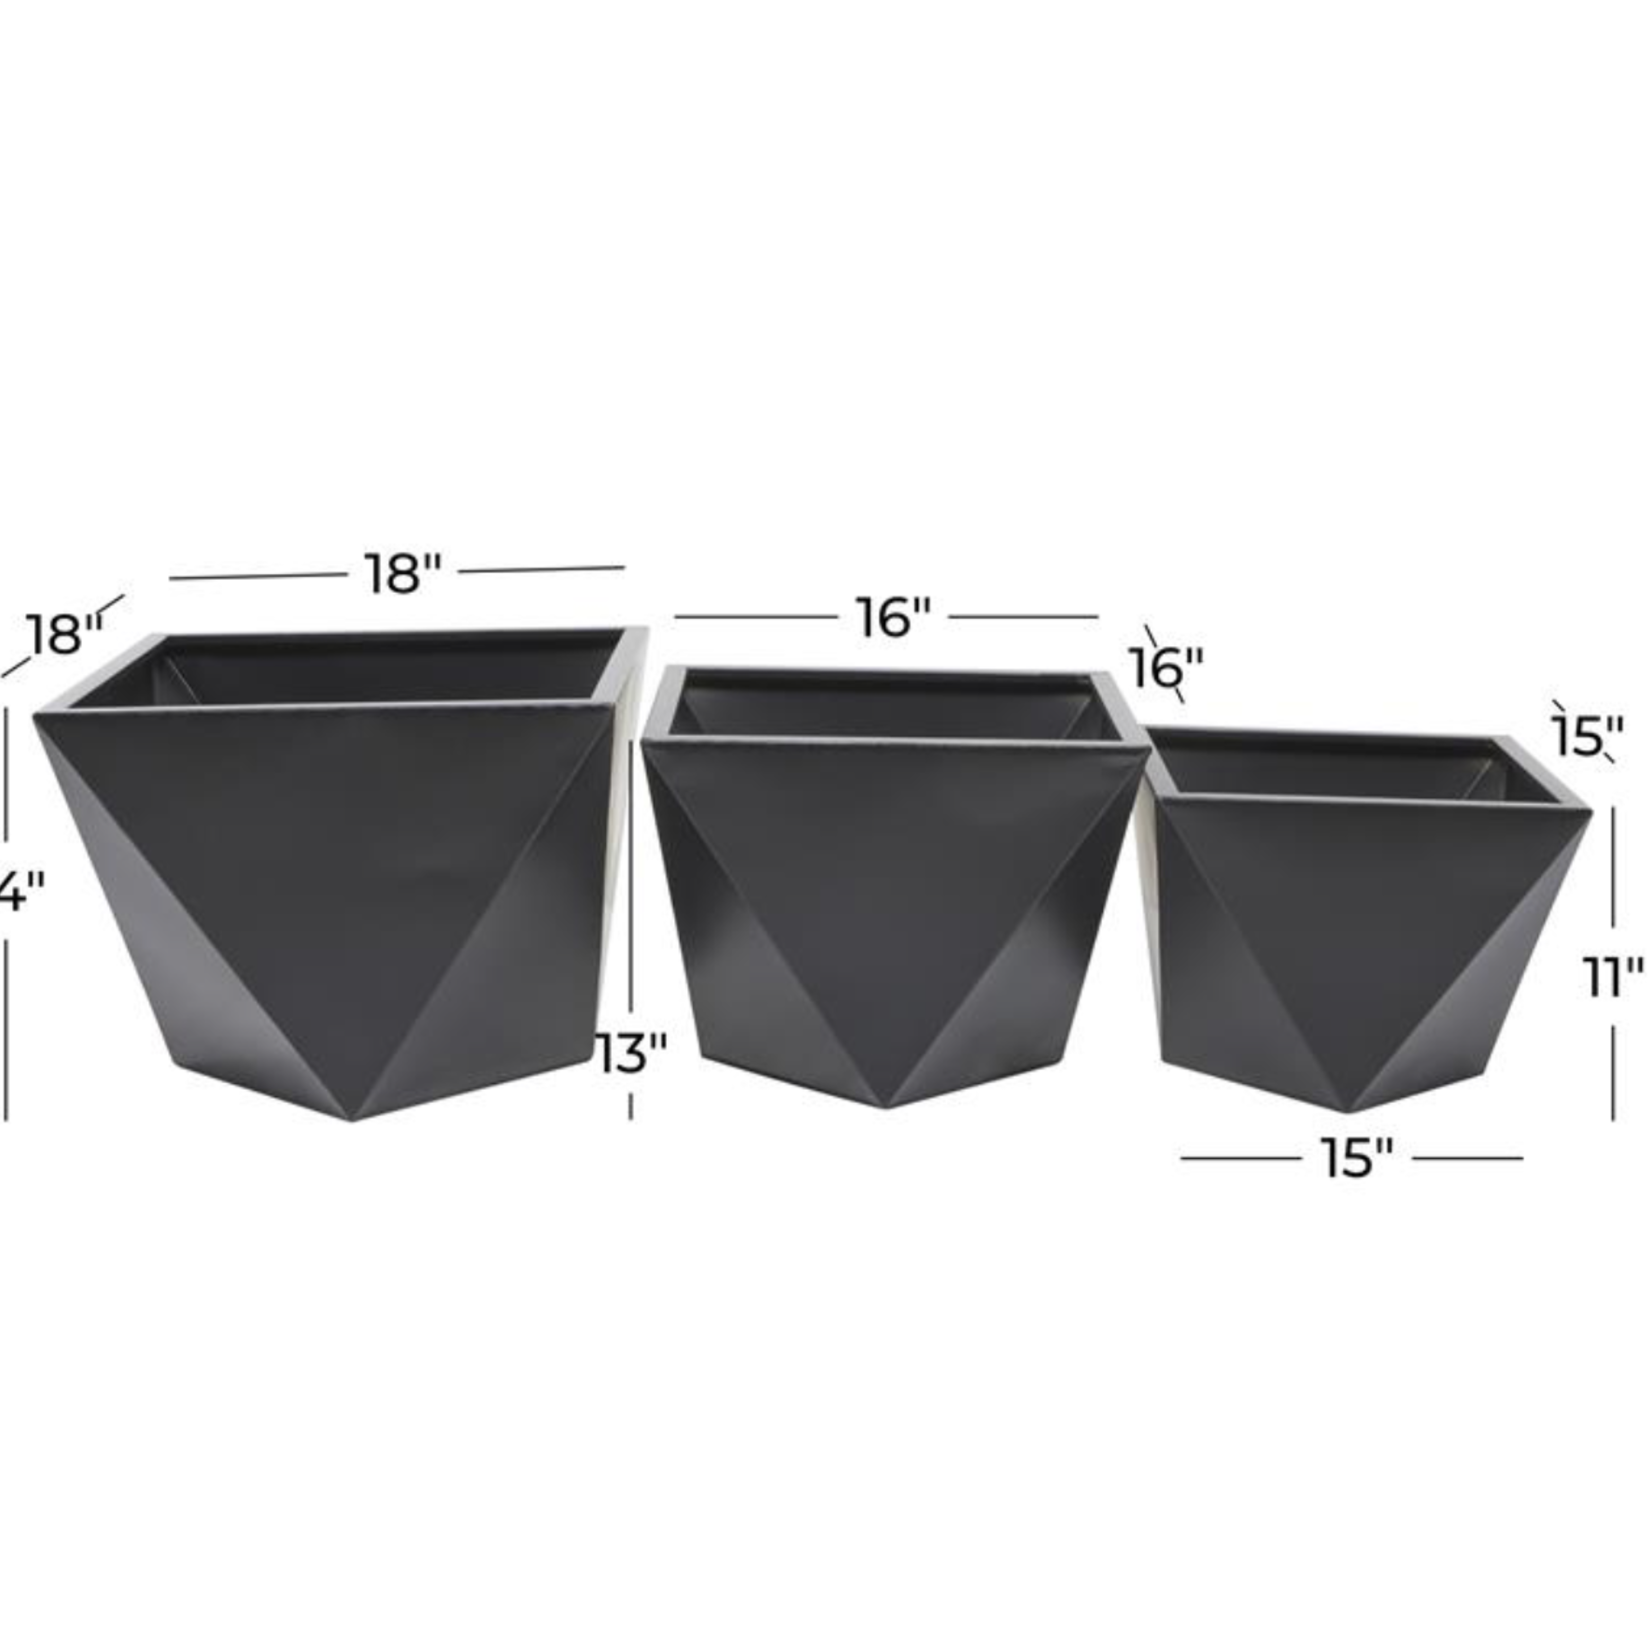 14.5”h x 18.5” LARGE BLACK METAL GEOMETRICAL INDOOR OUTDOOR PLANTER (NOT WATER TIGHT, PRICE PER SIZE, BOX HAS ASSORTMENT)